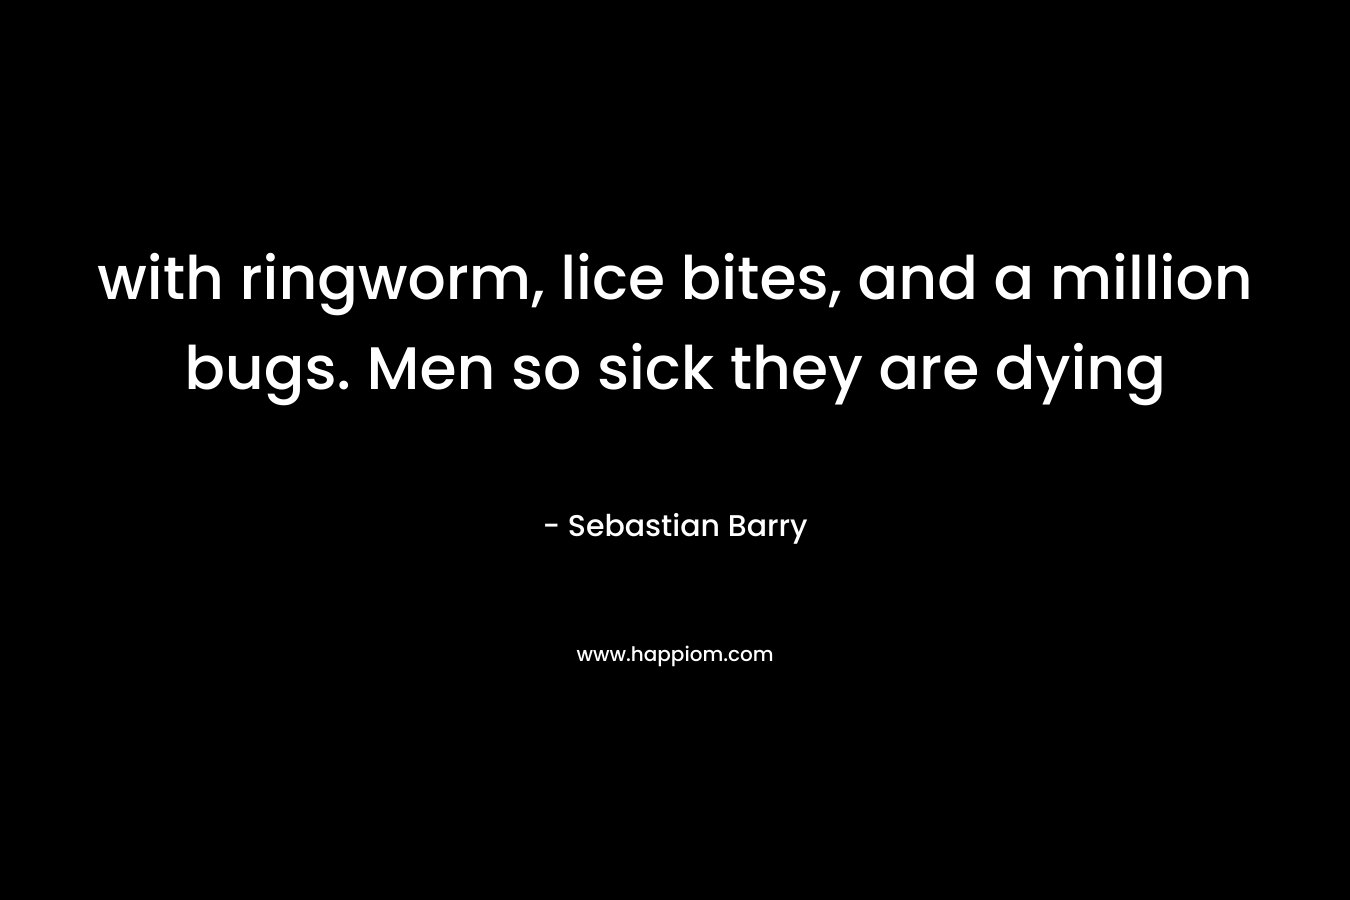 with ringworm, lice bites, and a million bugs. Men so sick they are dying – Sebastian Barry